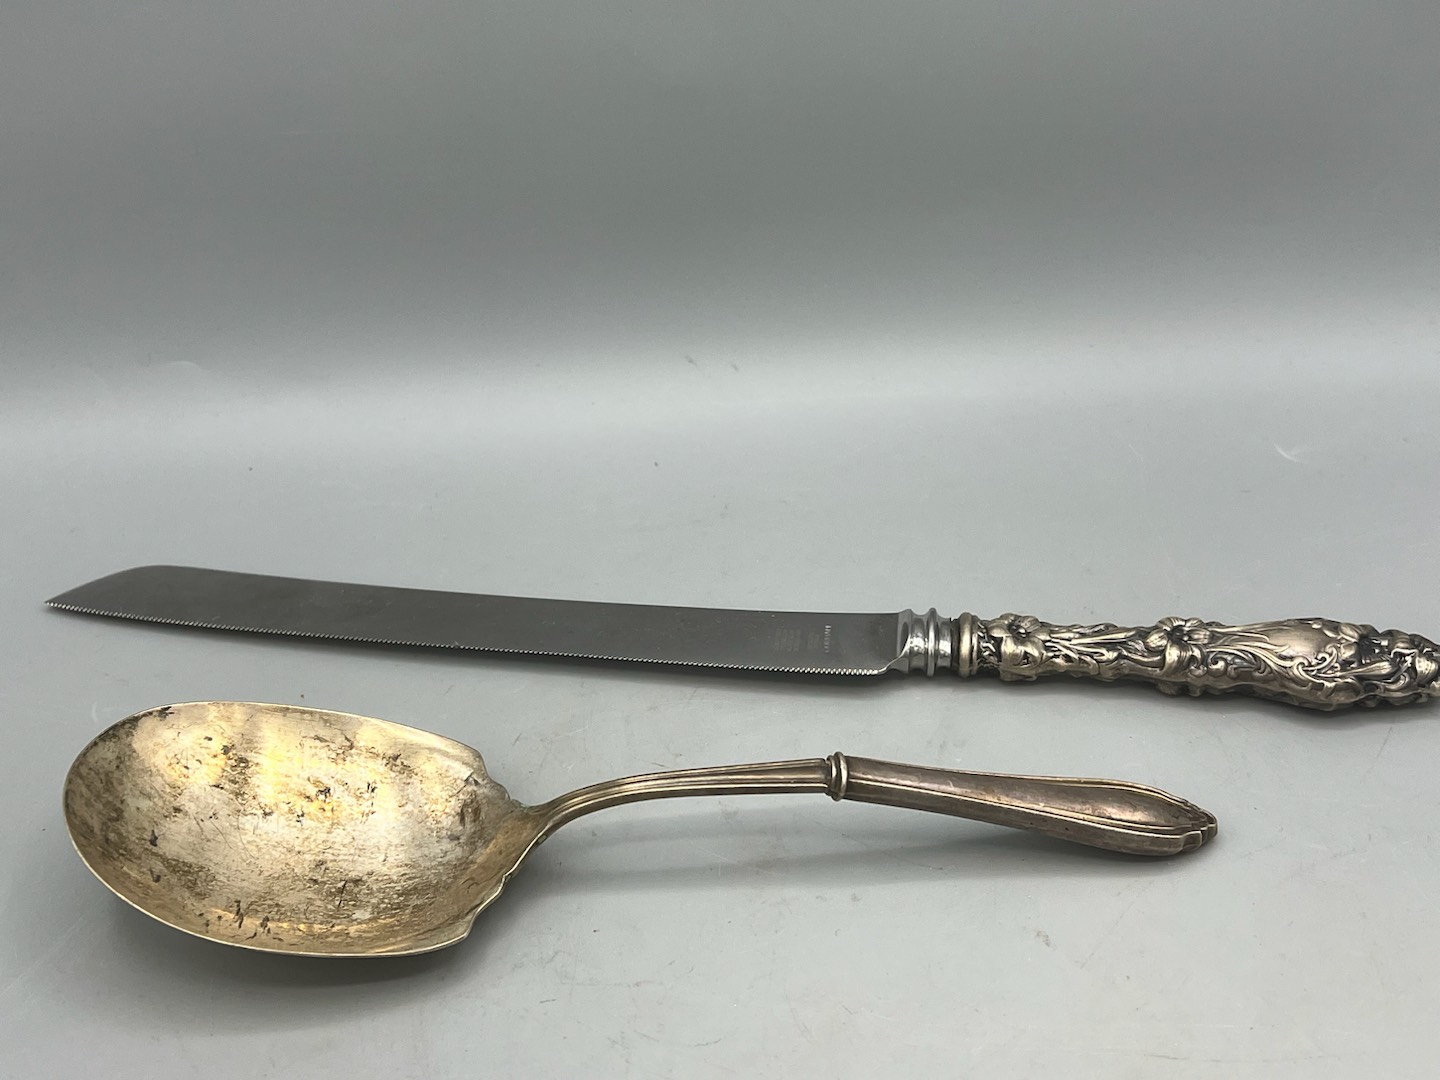 Sold at Auction: Victorian crochet hook/sterling handle